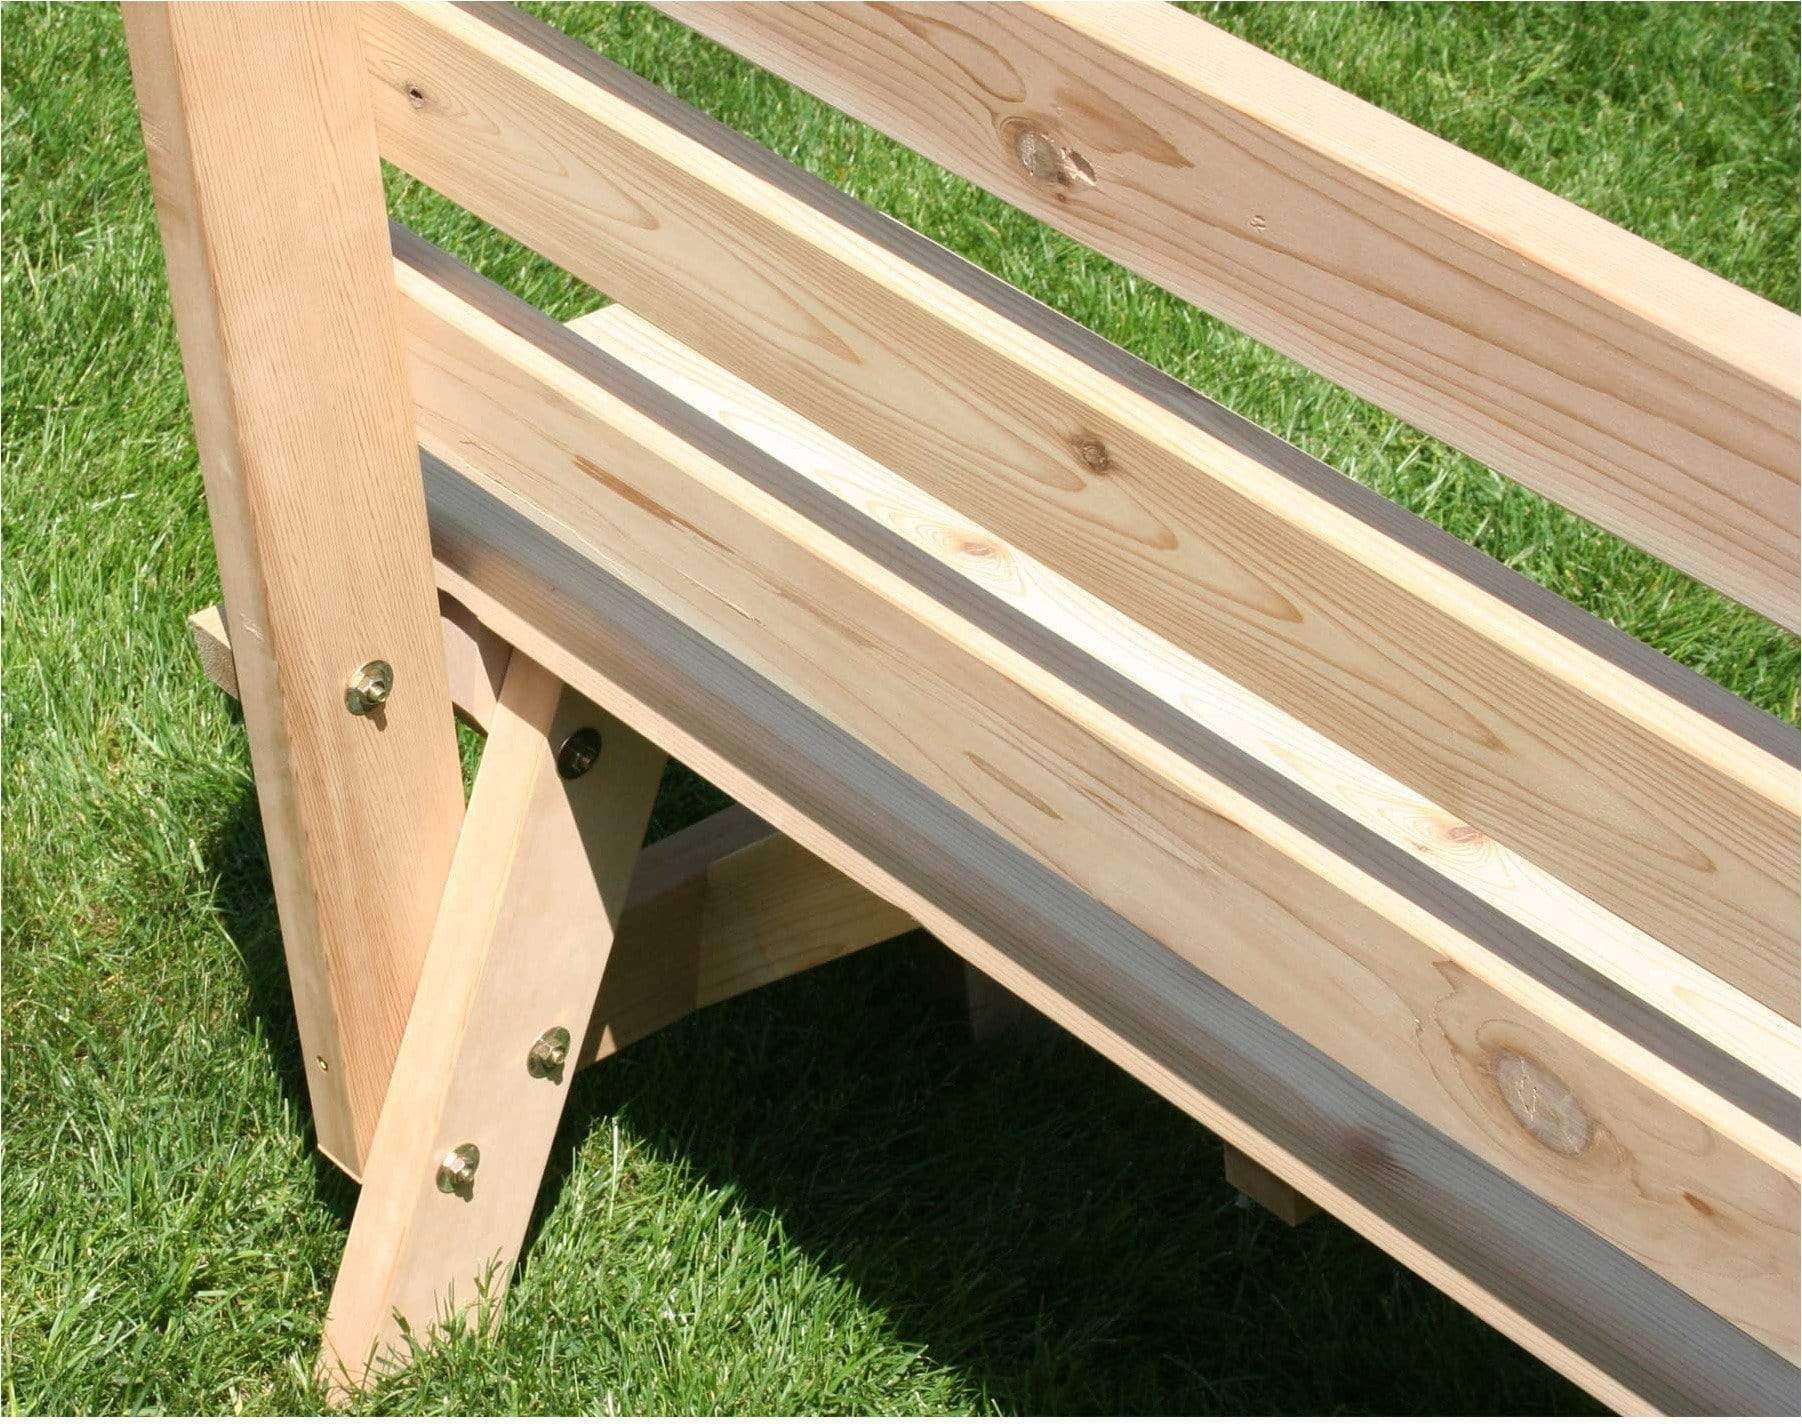 Creekvine Designs Cedar 4' Cross Legged Picnic Table with (2) Backed Benches-Rustic Furniture Marketplace